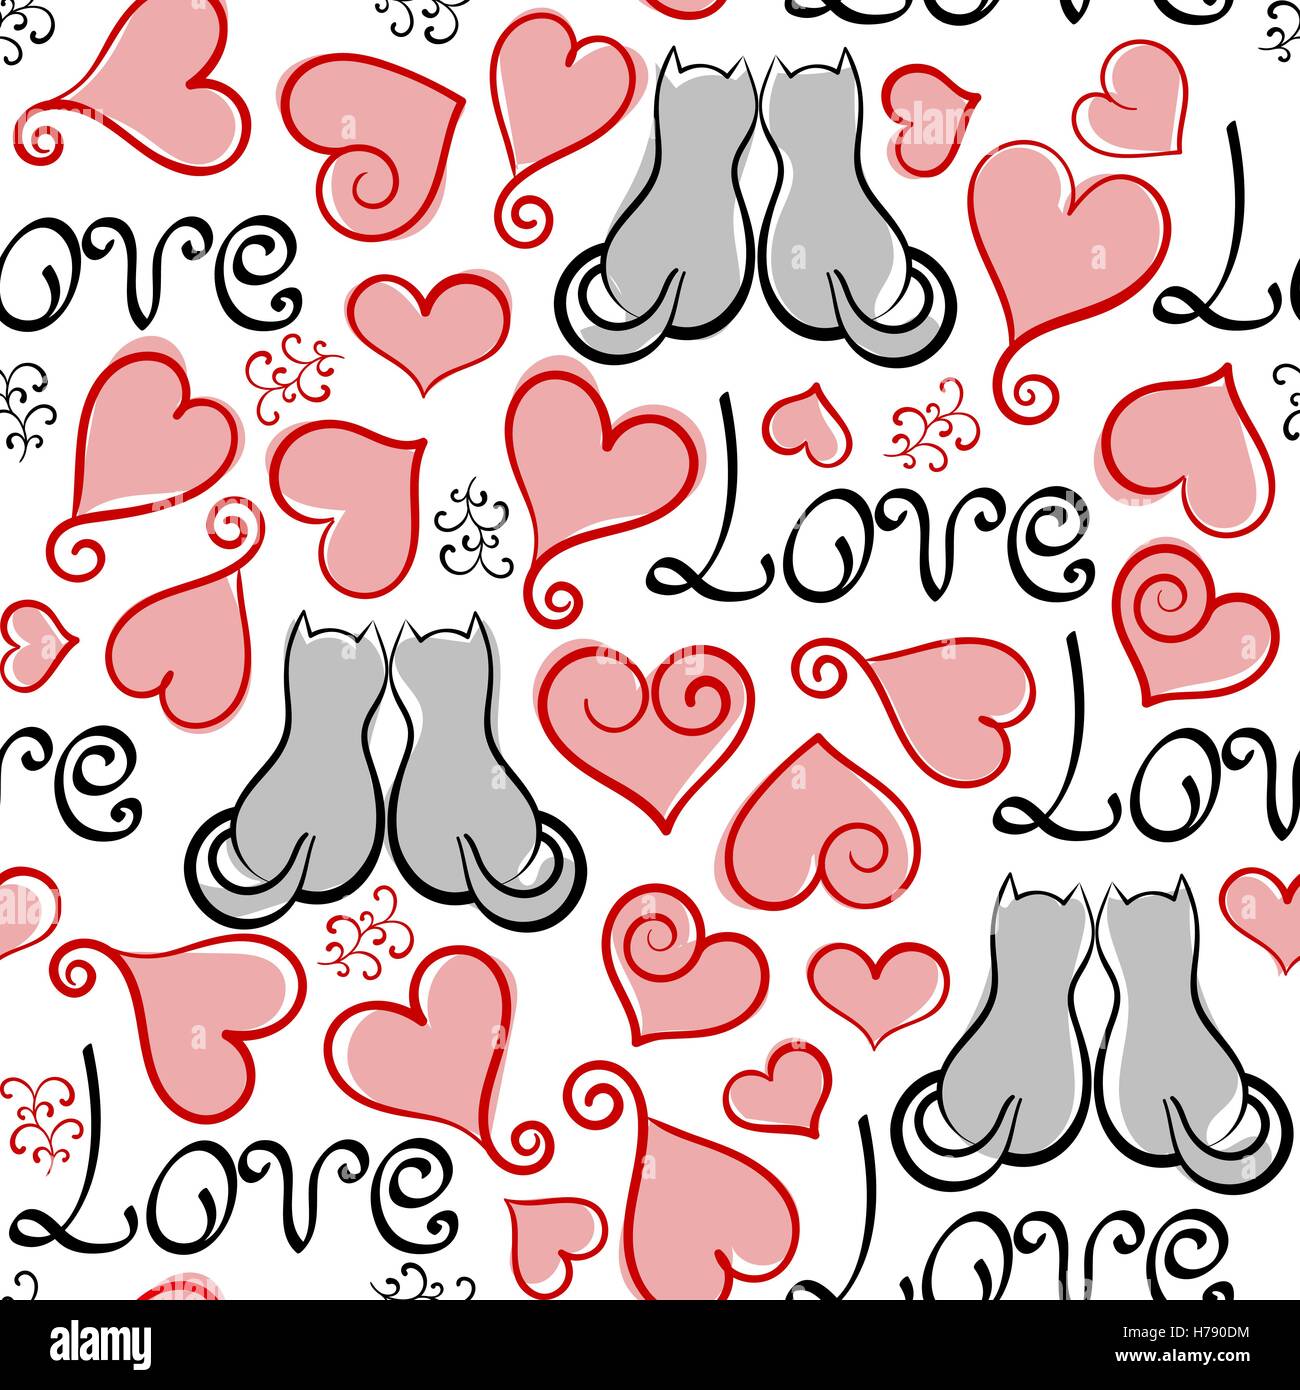 Grunge vector seamless pattern with hand painted hearts, lettering and cats. Texture for web, print, valentines day wrapping paper, wedding invitation card background, textile, fabric, home decor, romantic gift paper Stock Vector